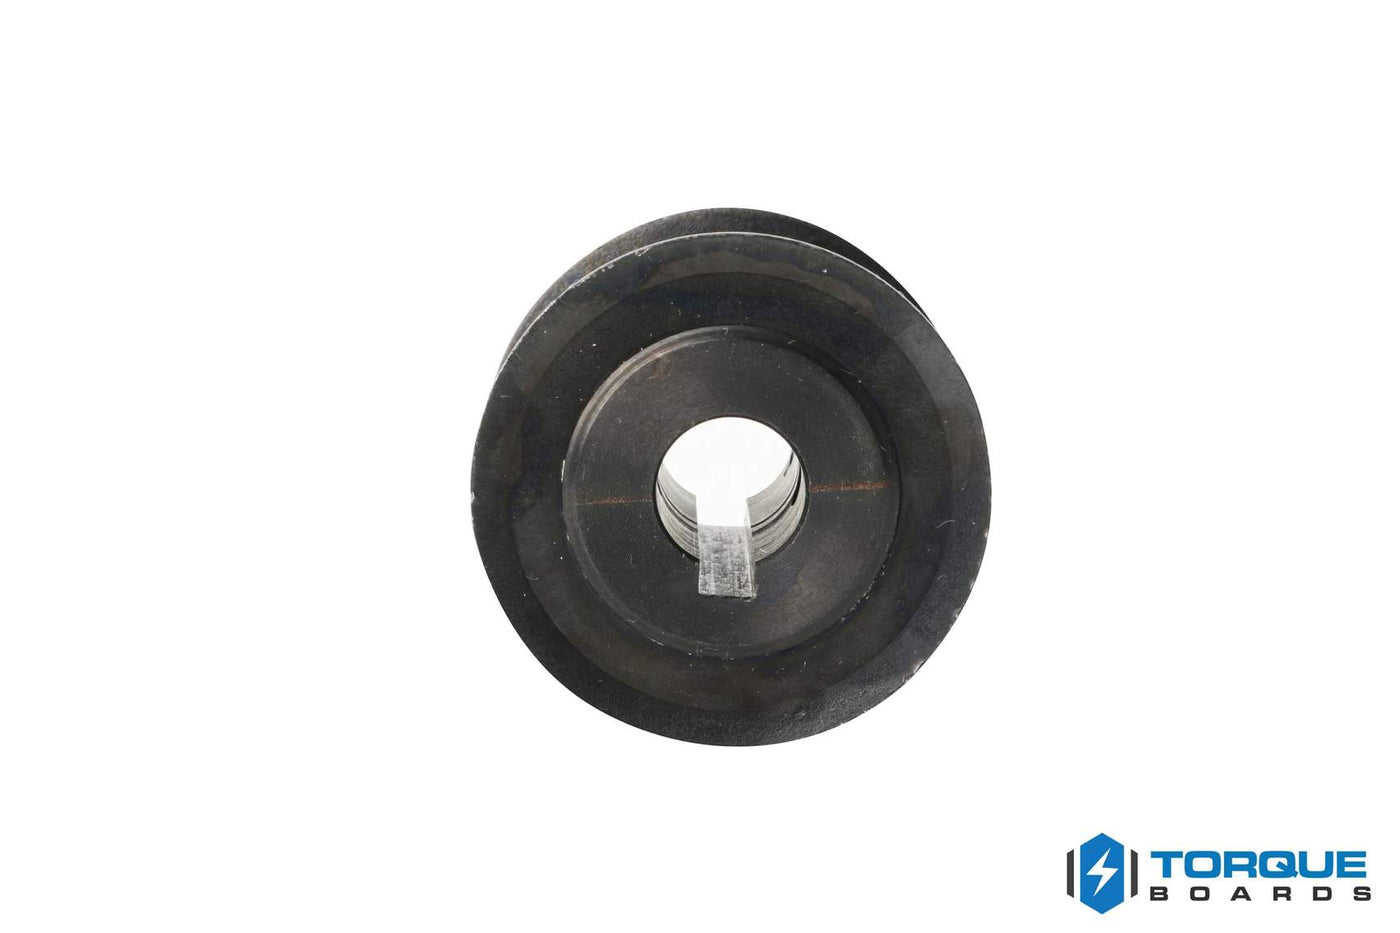 18T HTD5 15mm Motor Pulley